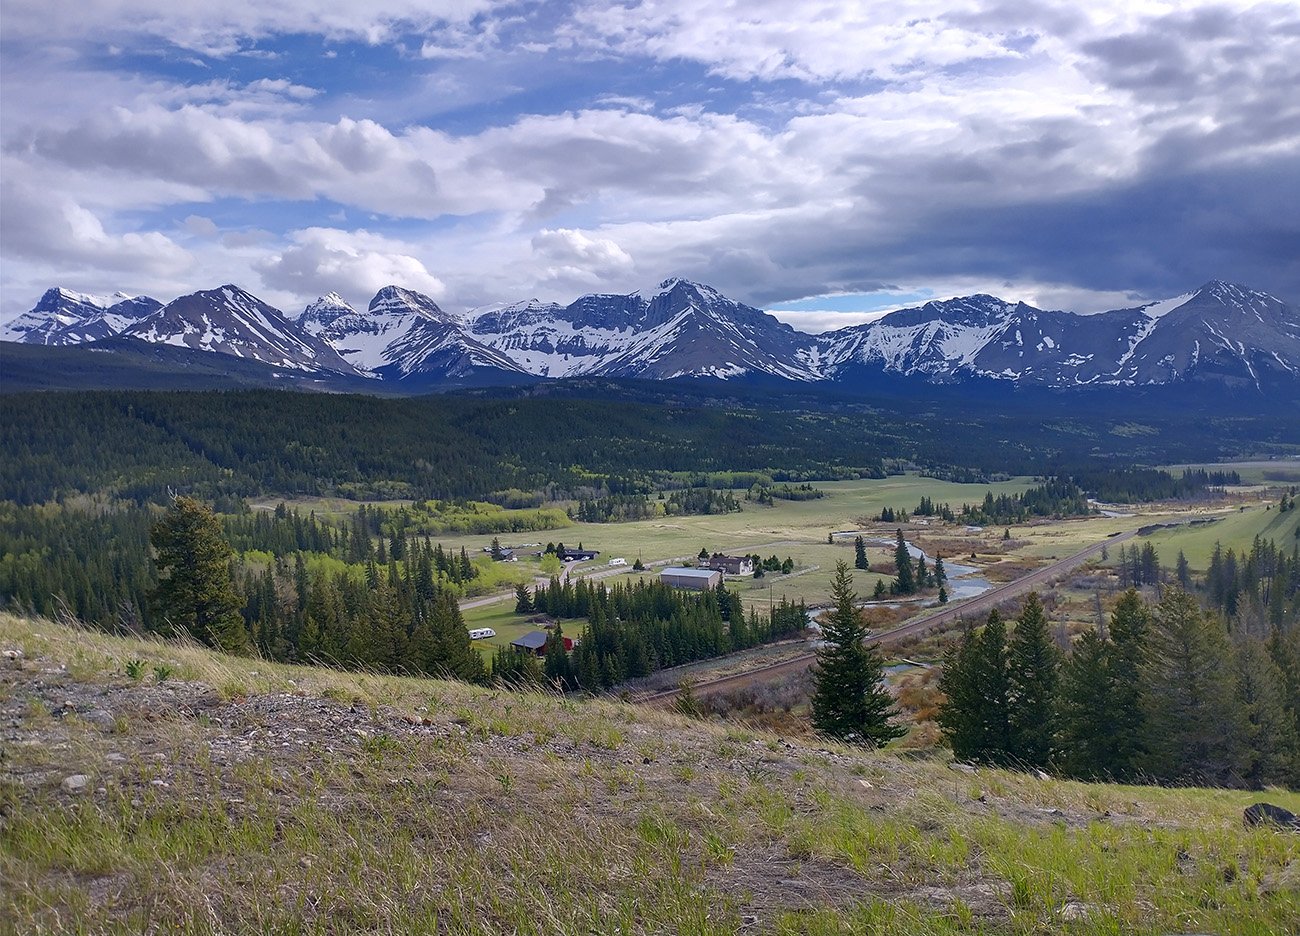 Coming out of CrowsNest pass highway and into Alberta. You can only look back at the Rockies now as you enter Flatland.